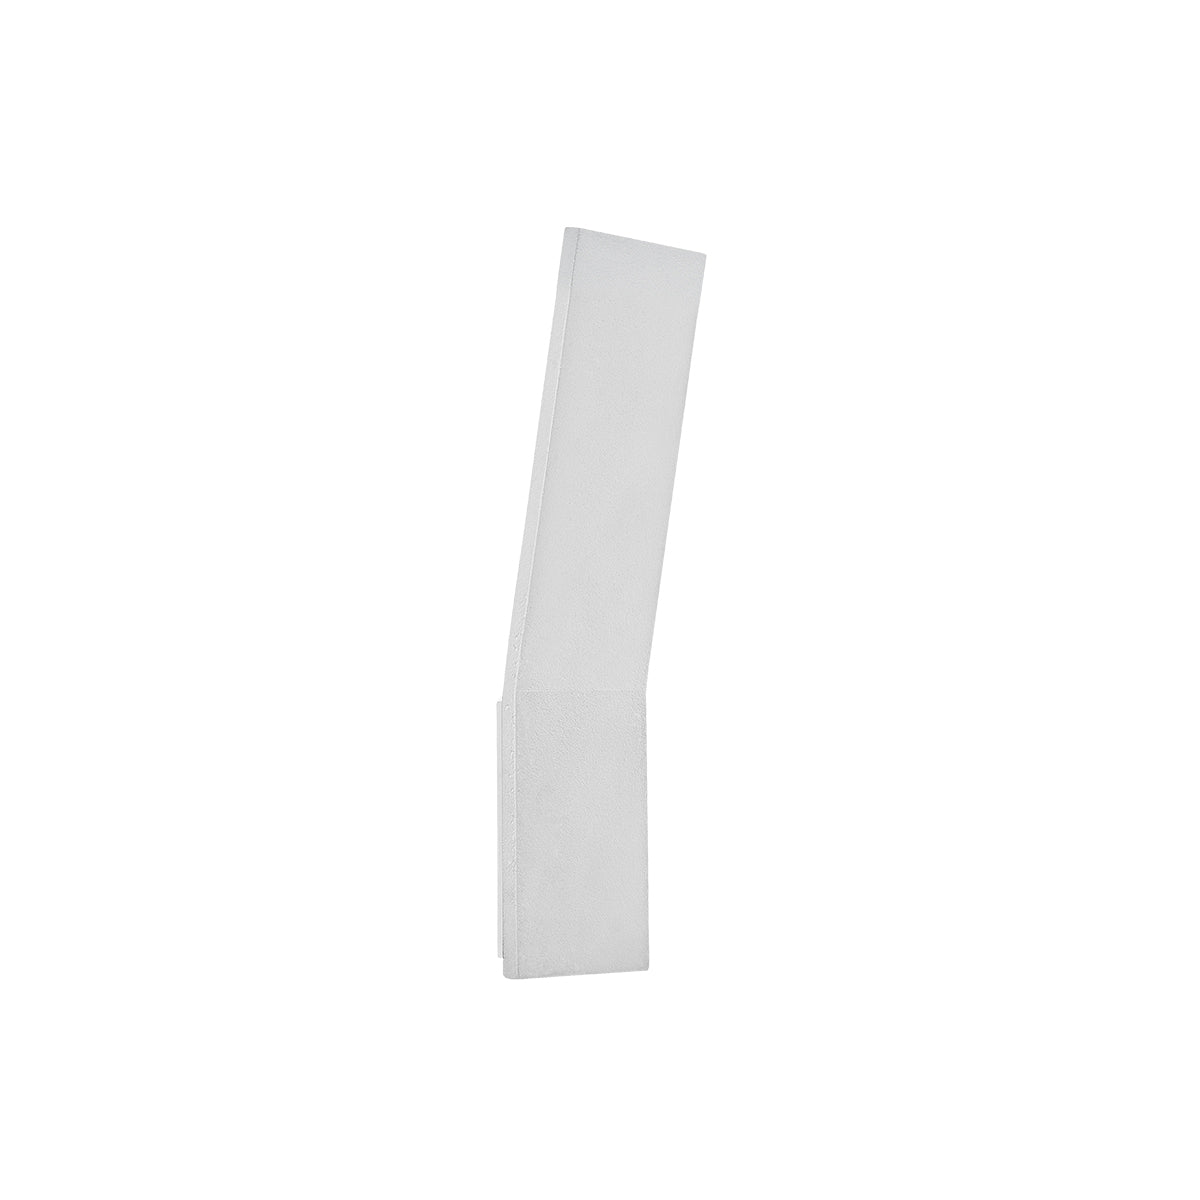 BLADE Sconce White INTEGRATED LED - WS-11511-WT | MODERN FORMS